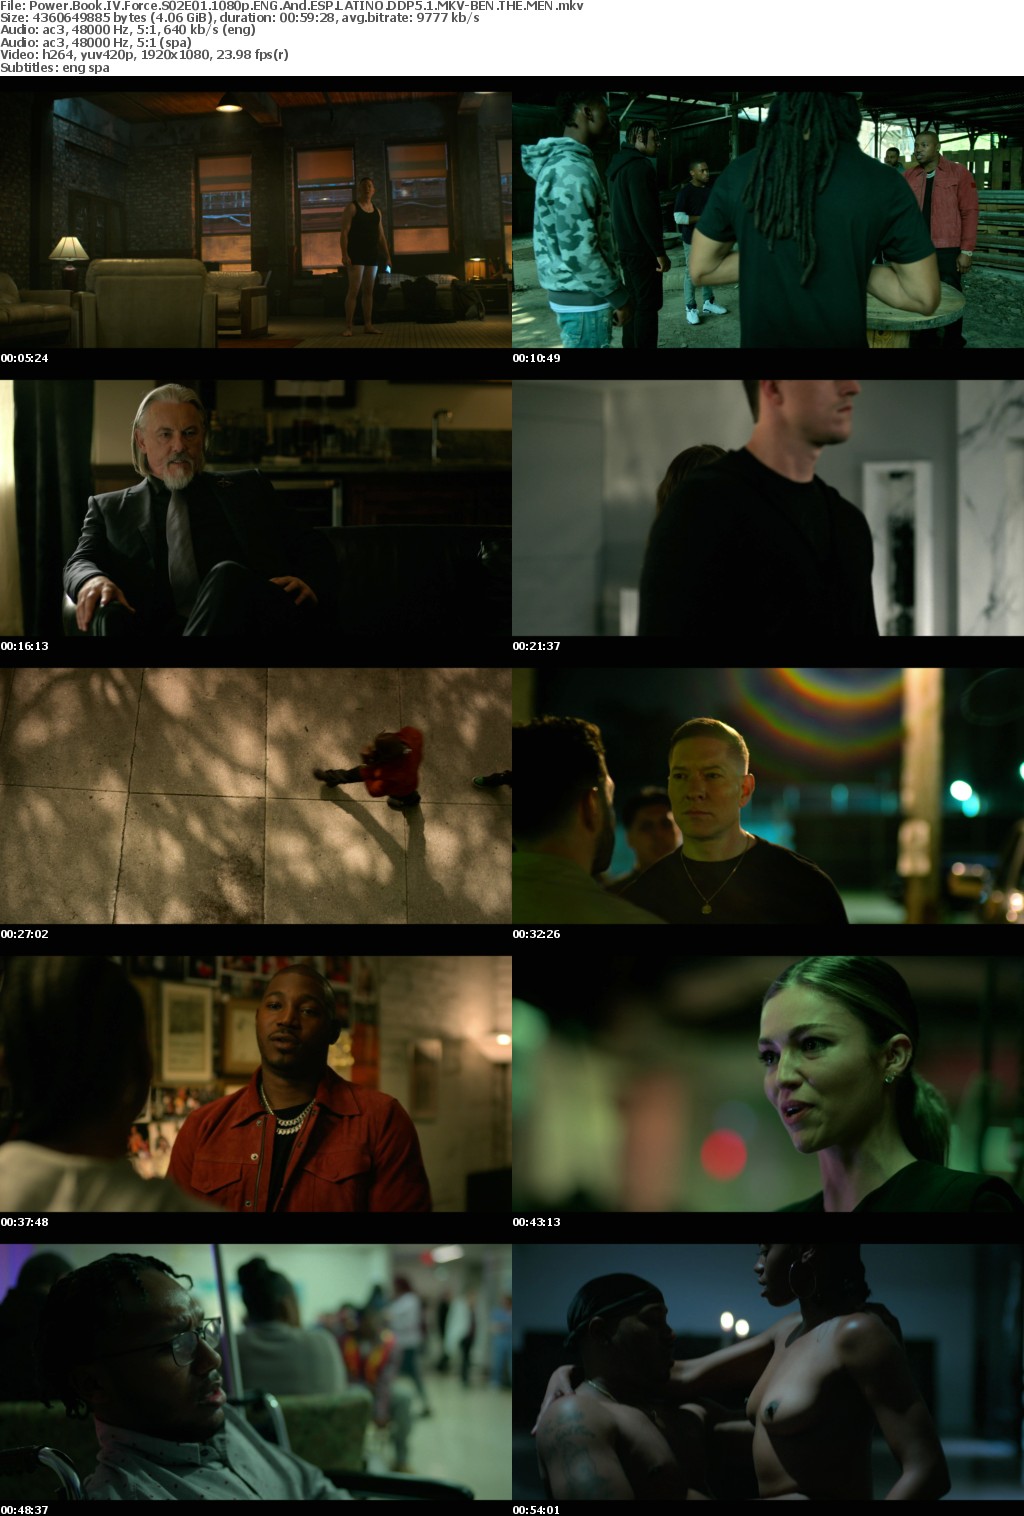 Power Book IV Force S02E01 1080p ENG And ESP LATINO DDP5 1 MKV-BEN THE MEN